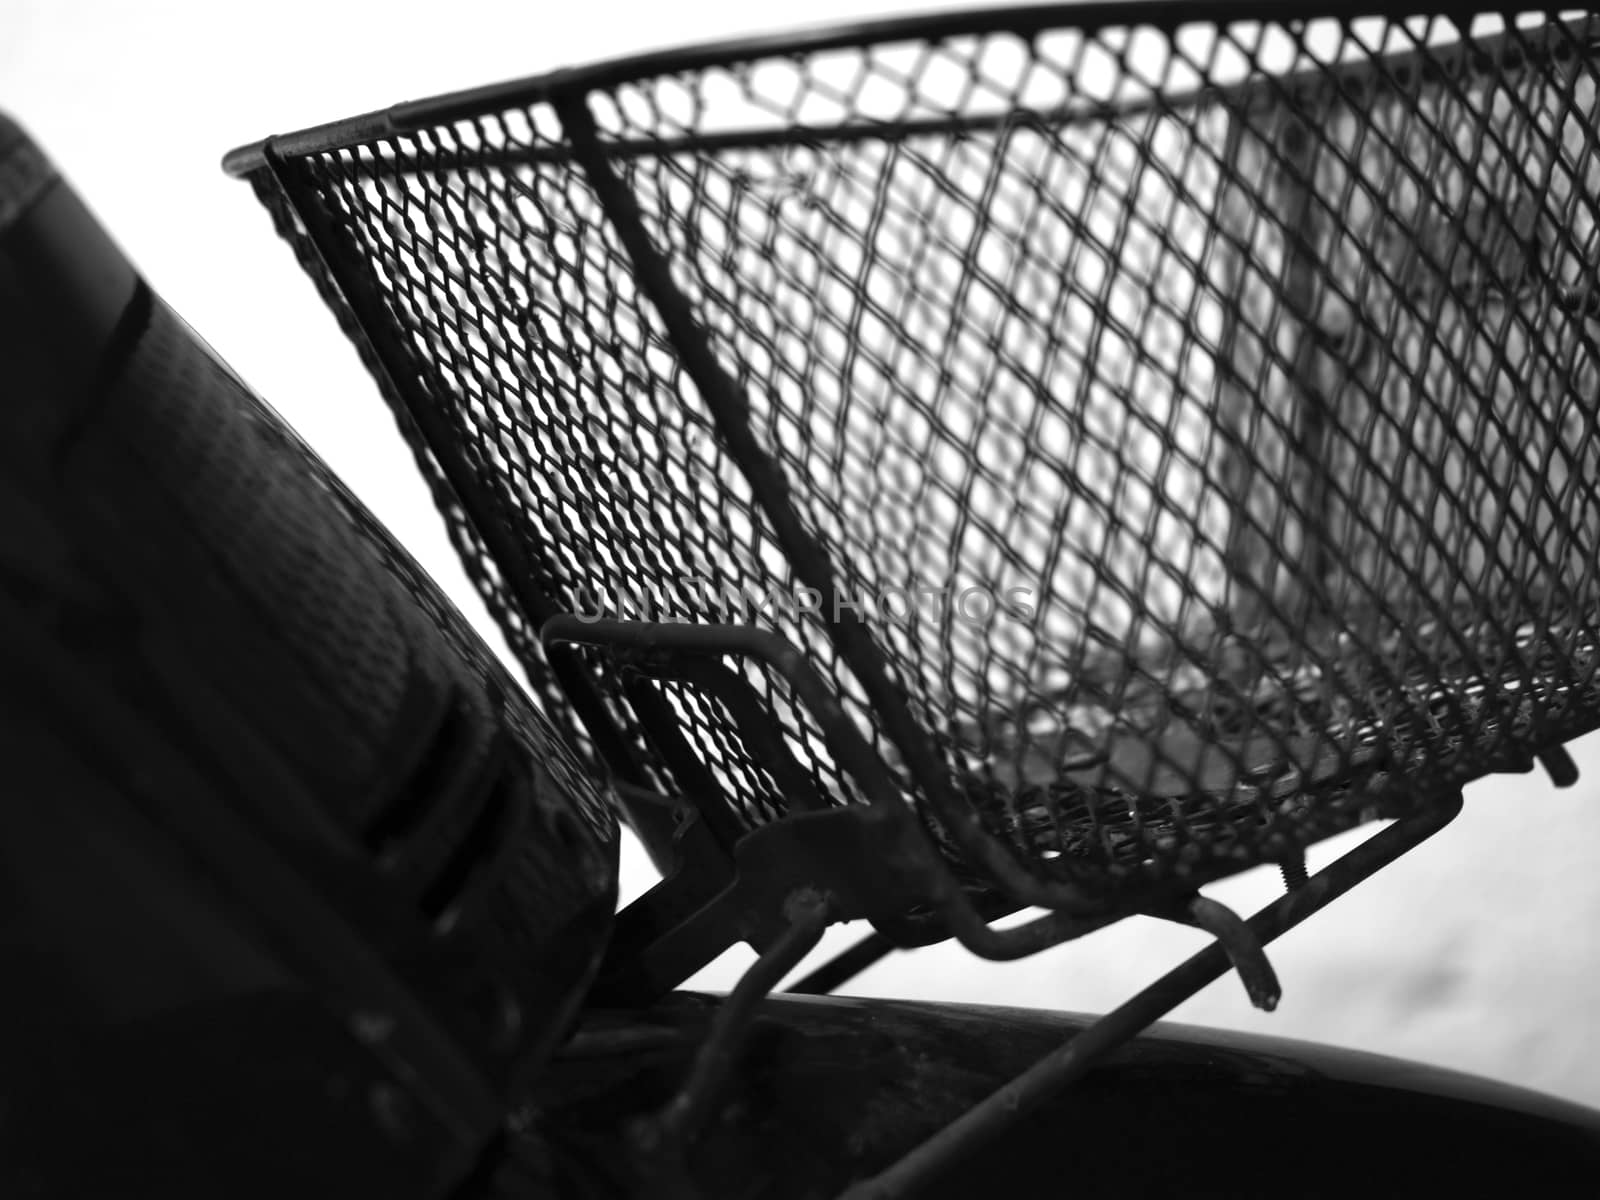 BLURRY SHOT OF MOTORCYCLE FRONT METAL BASKET by PrettyTG